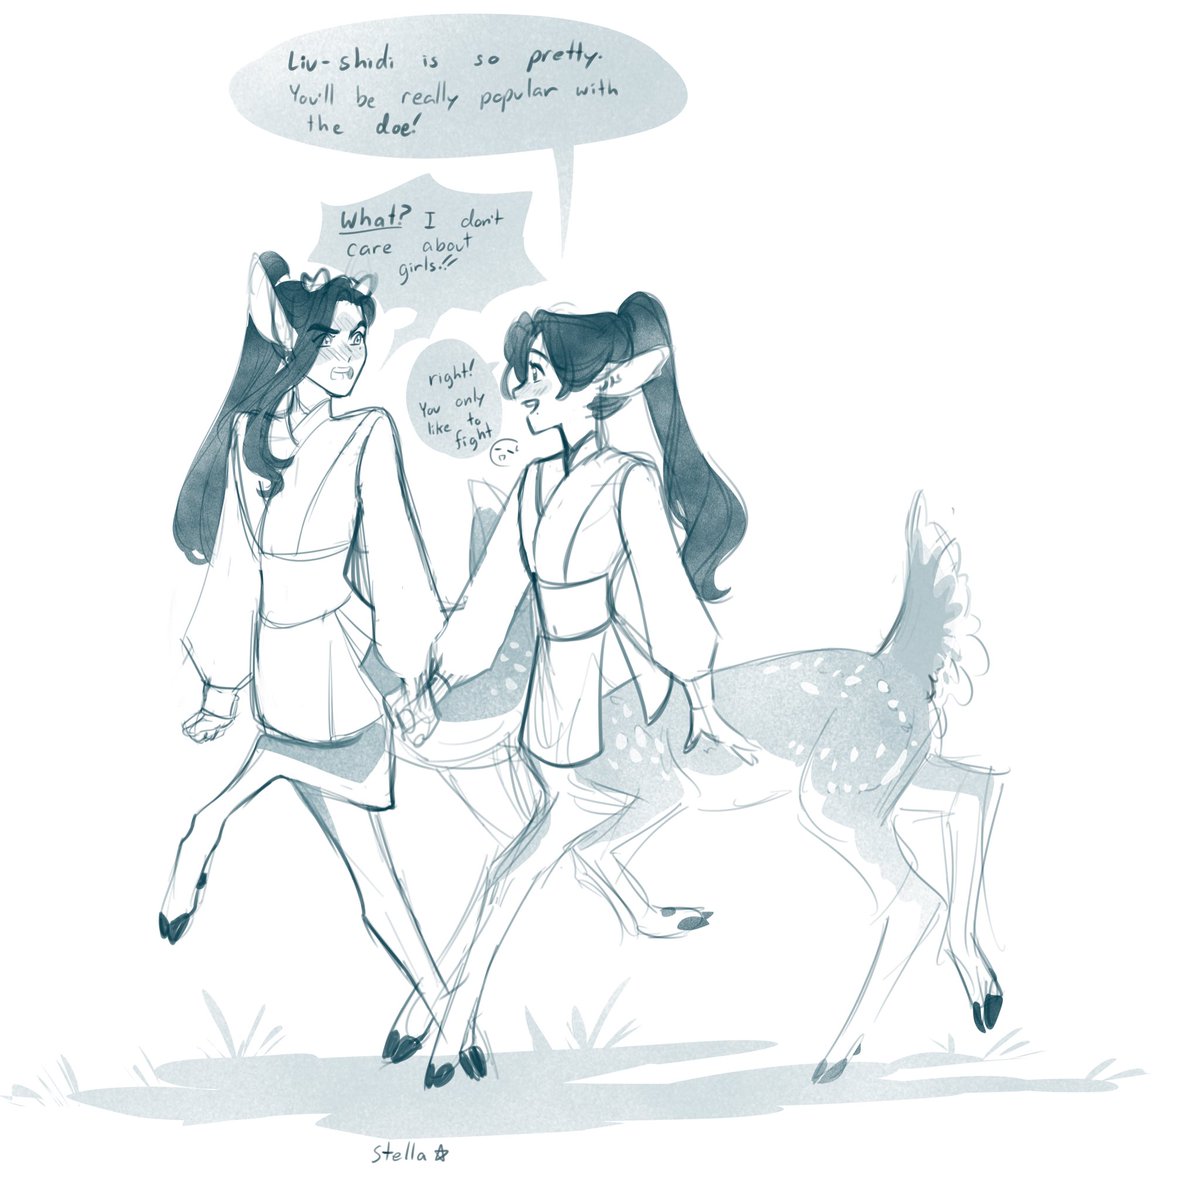 ( Adolescent liushen ) lqg and SY grew up together!! Despite being a tag younger, LQG ended up growing bigger and getting his antlers before SY. He’s a popular choice for the next herd leader when they get old enough to participate in fights (which SY never does)